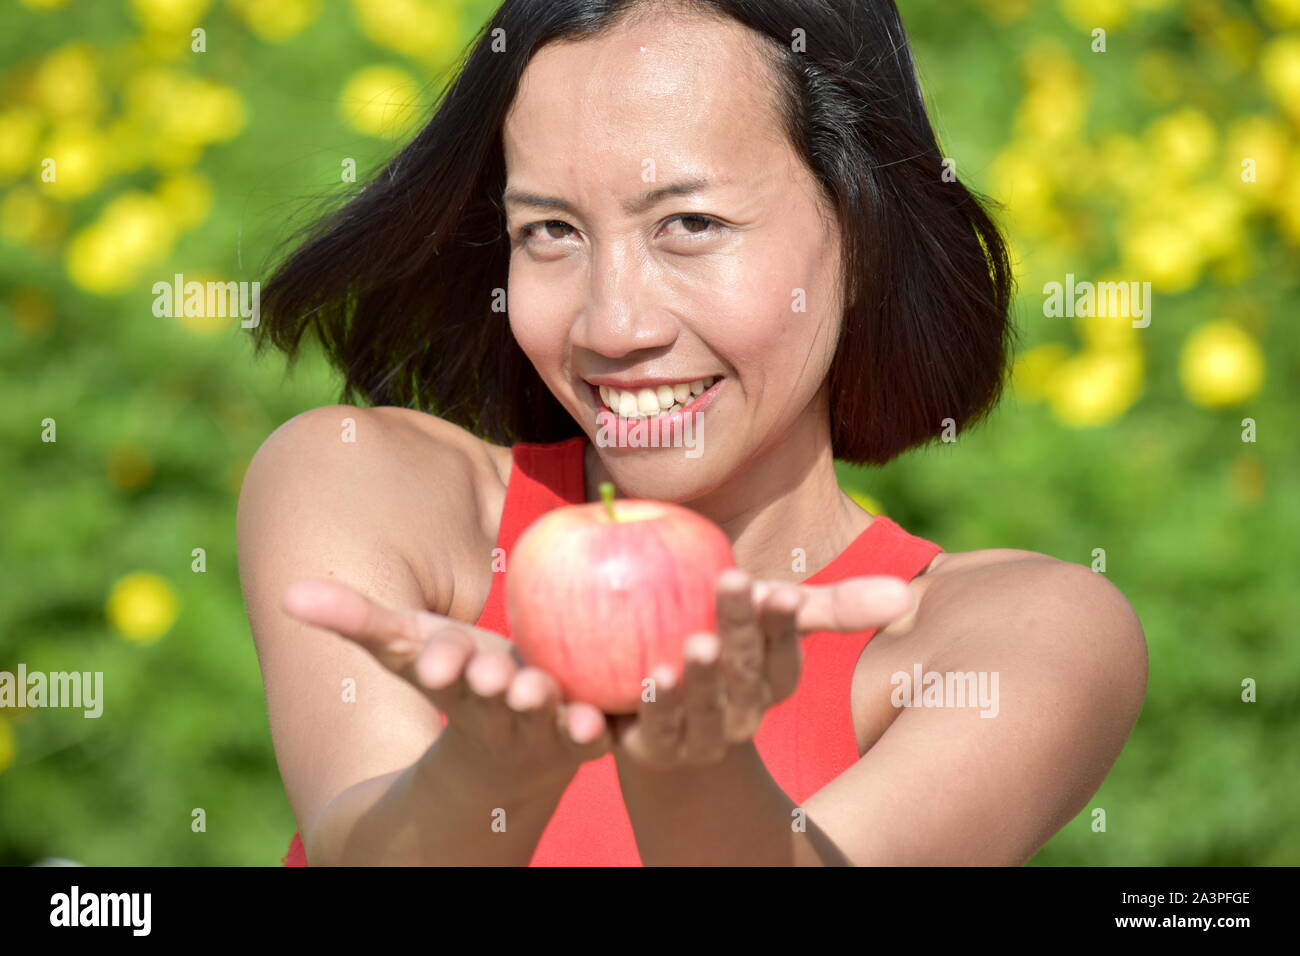 Young Female Smiling With An Apple Stock Photo